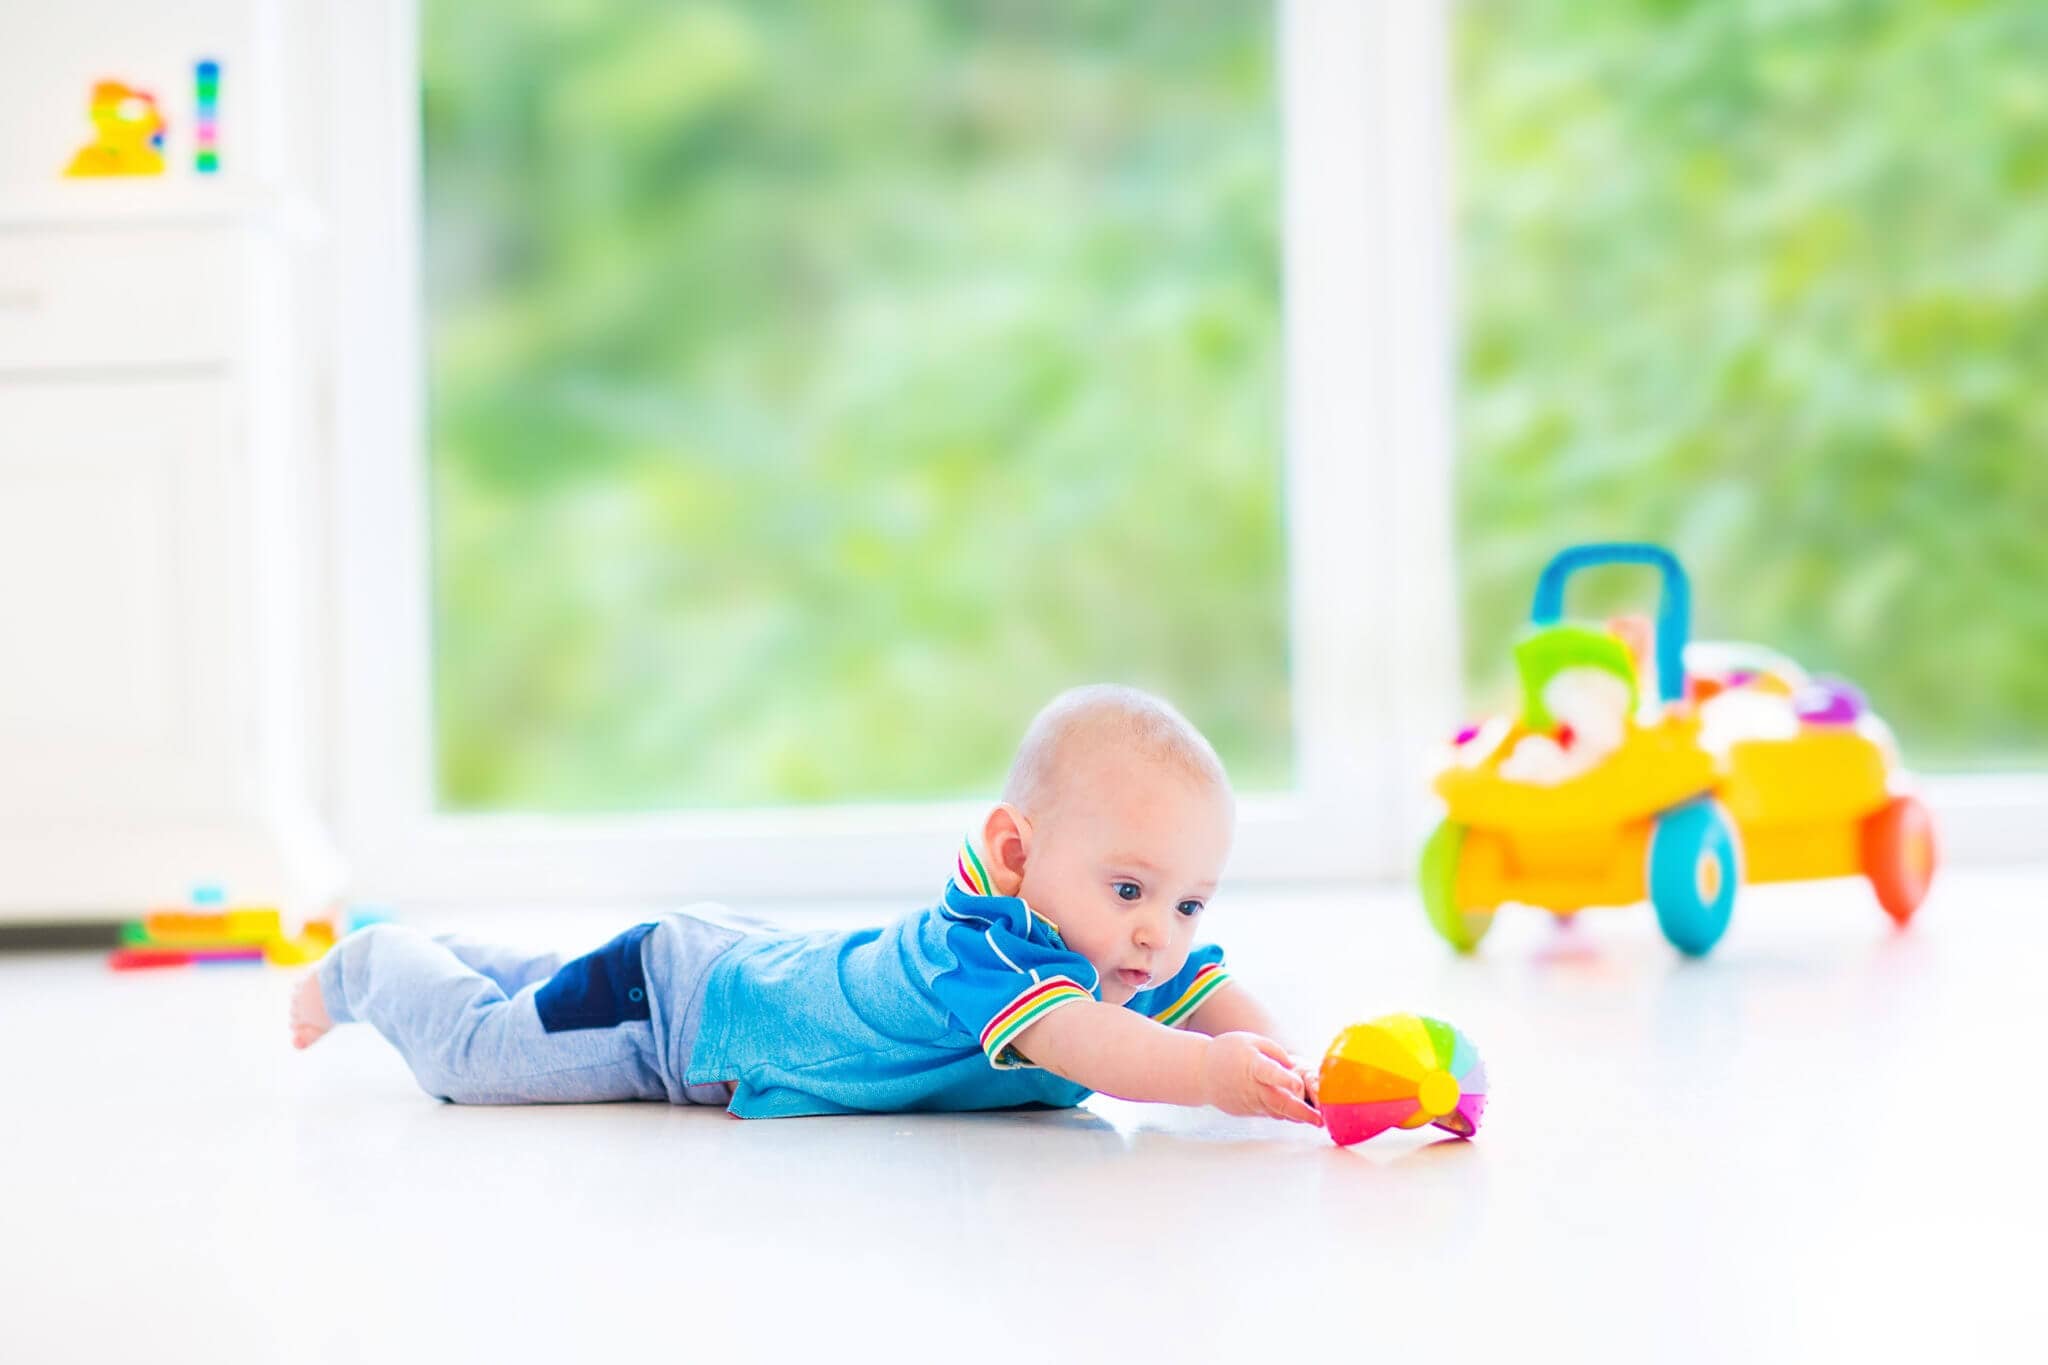 A baby boy lies on his stomach on the floor and plays with a toy